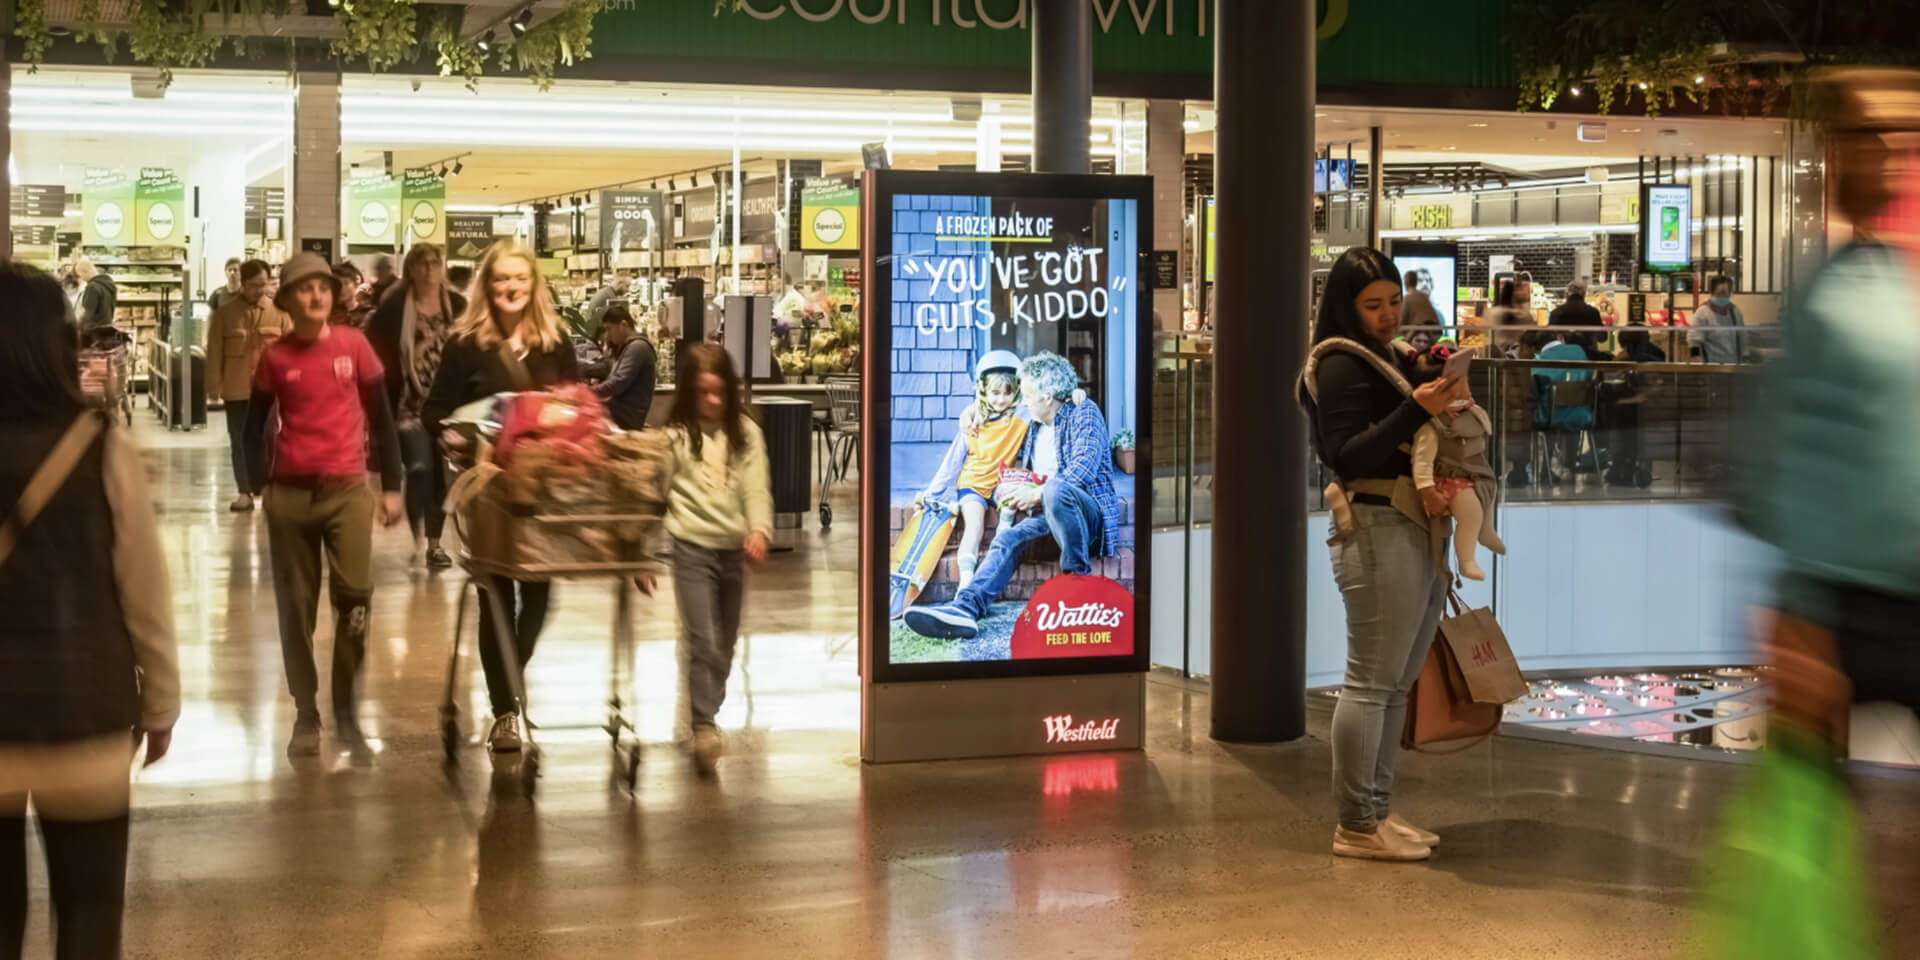 DOOH advertisement in a shopping mall